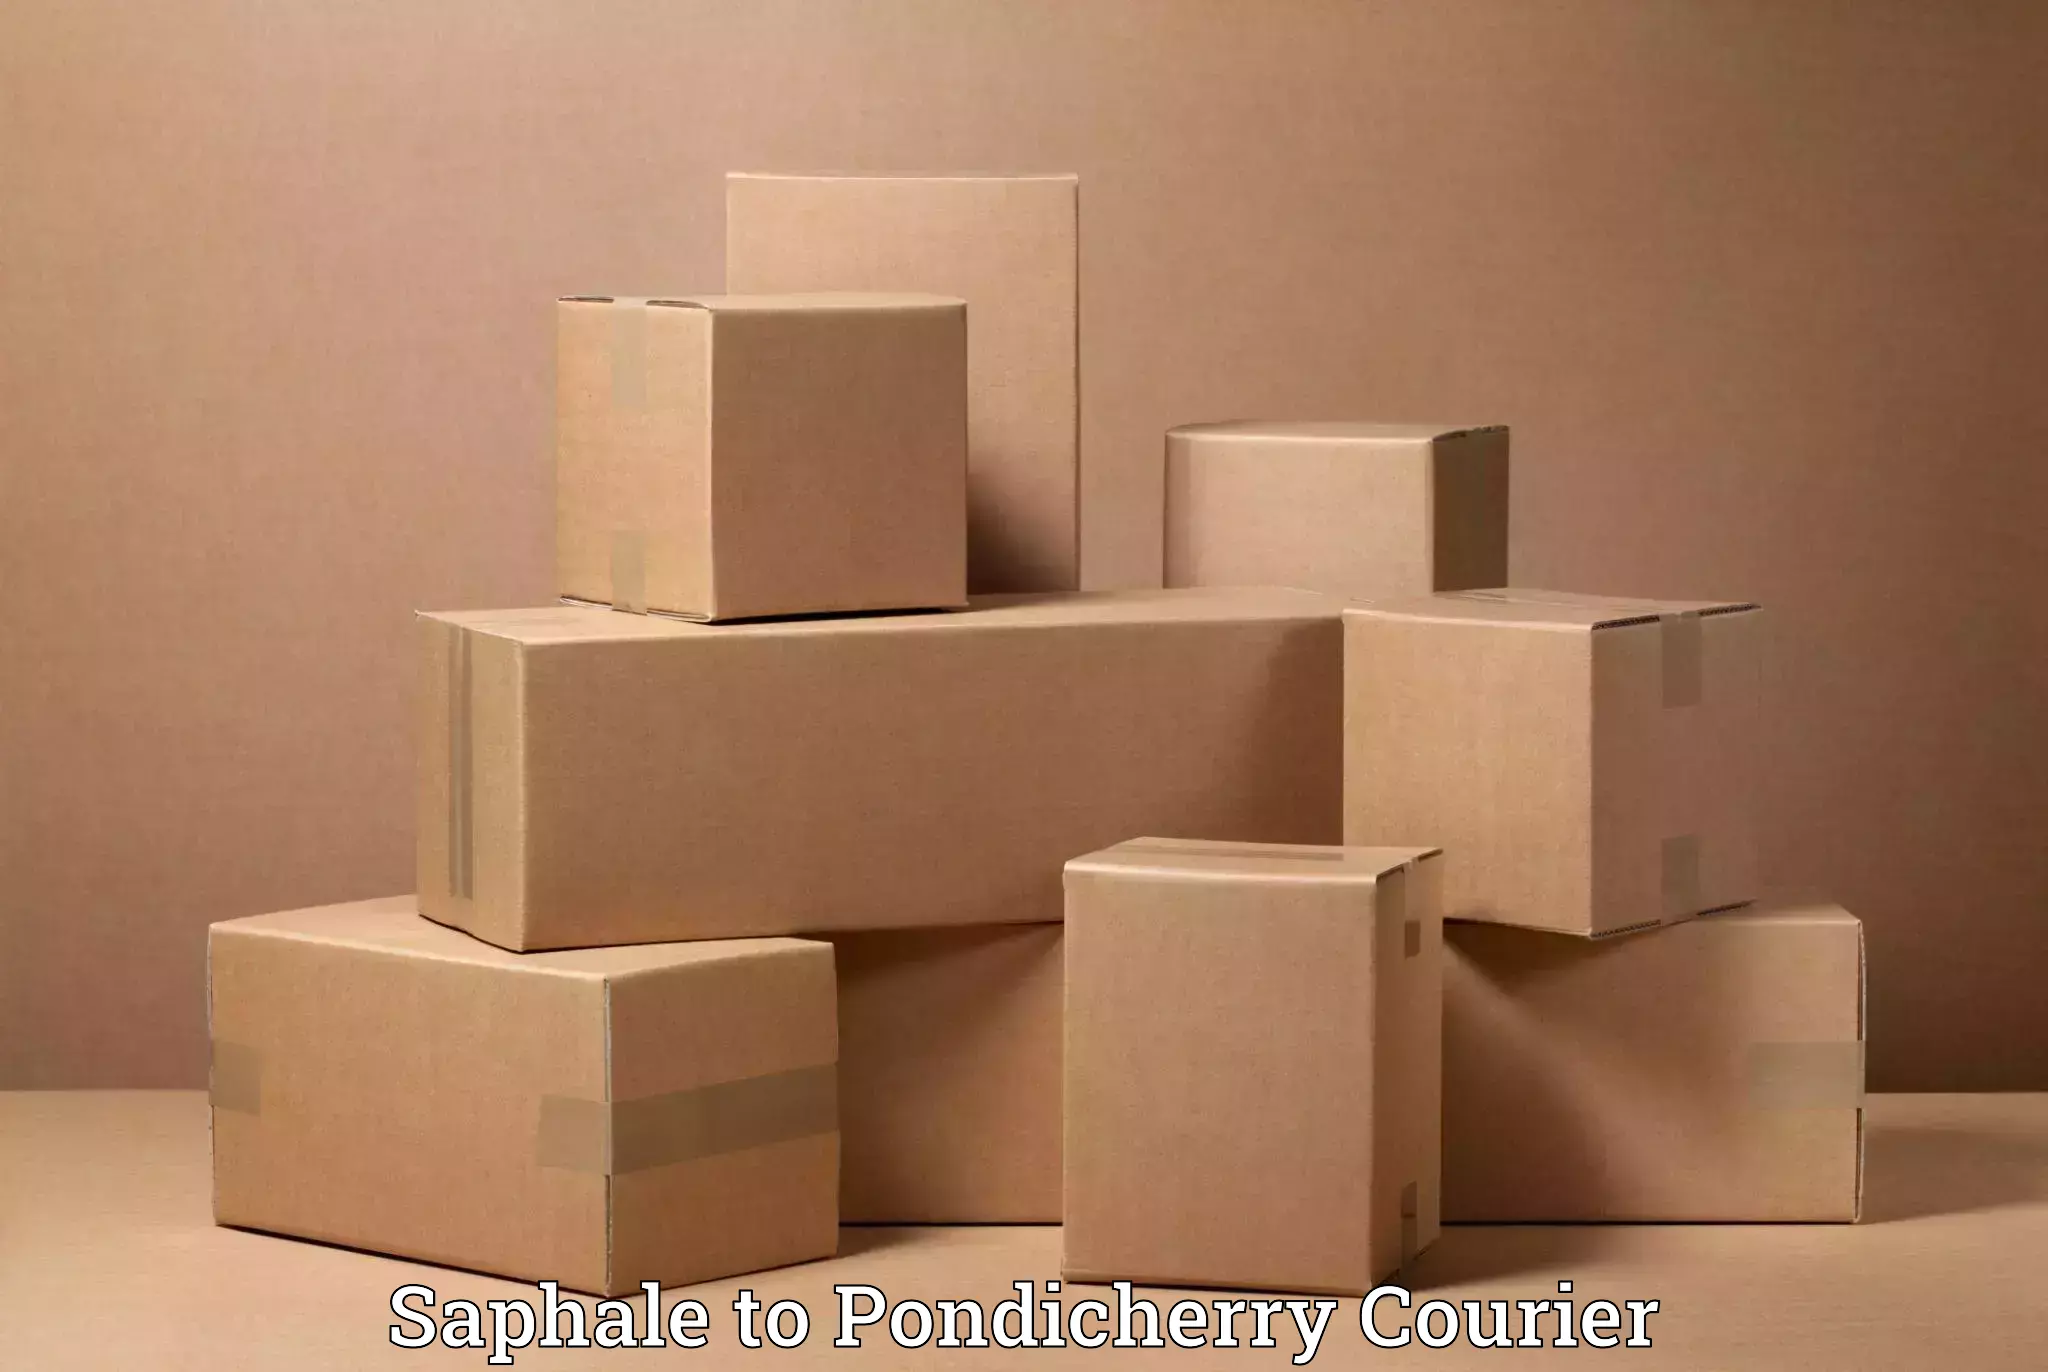 Moving and storage services Saphale to Pondicherry